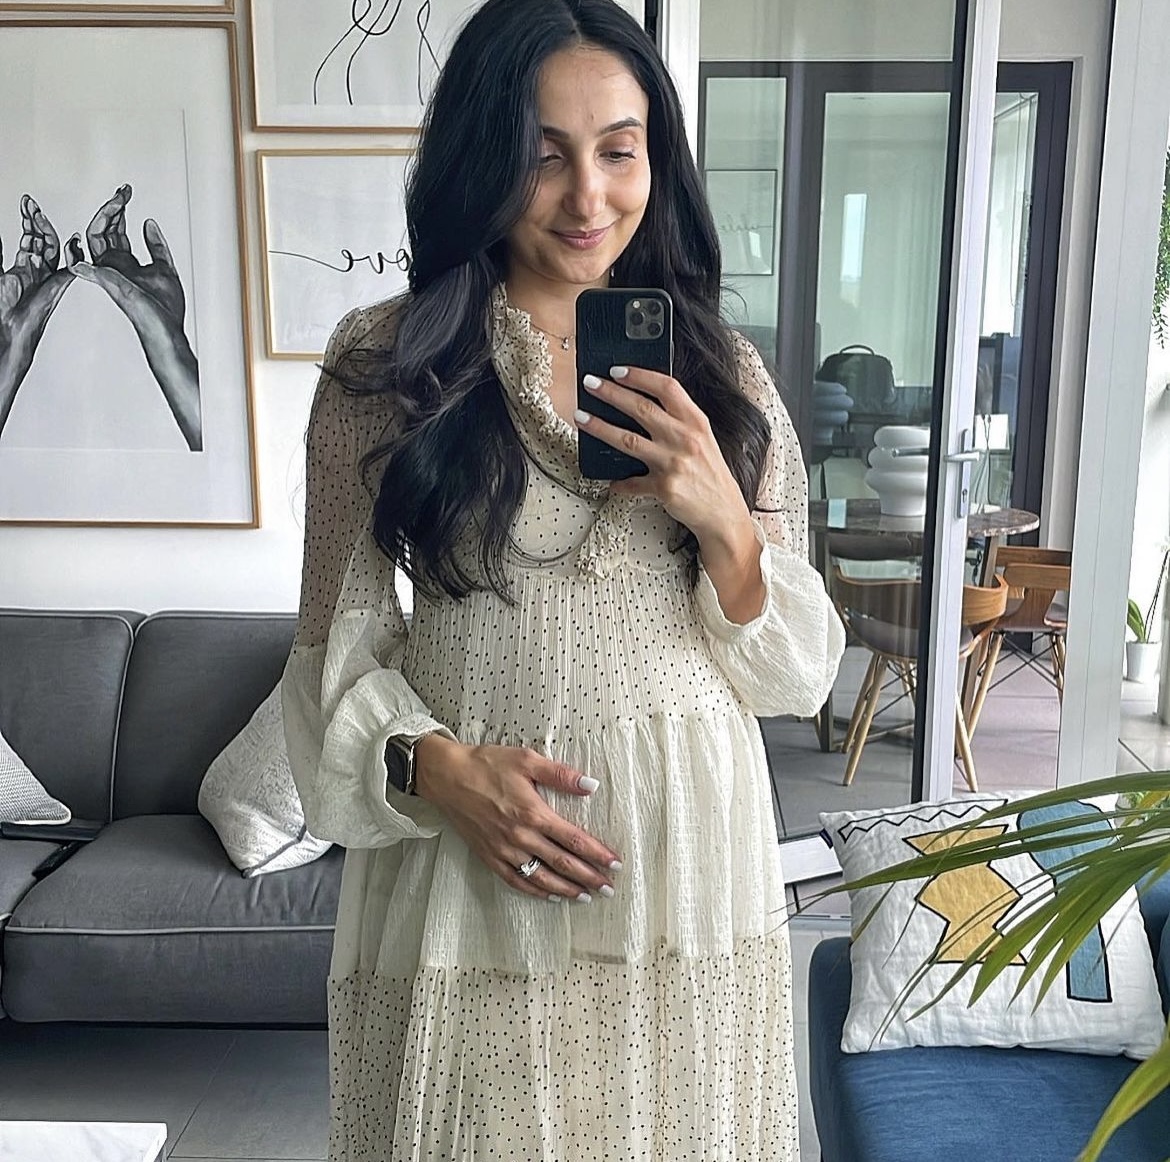 Spring Maternity Style You Need in Your Pregnancy Wardrobe - Oak + Oats